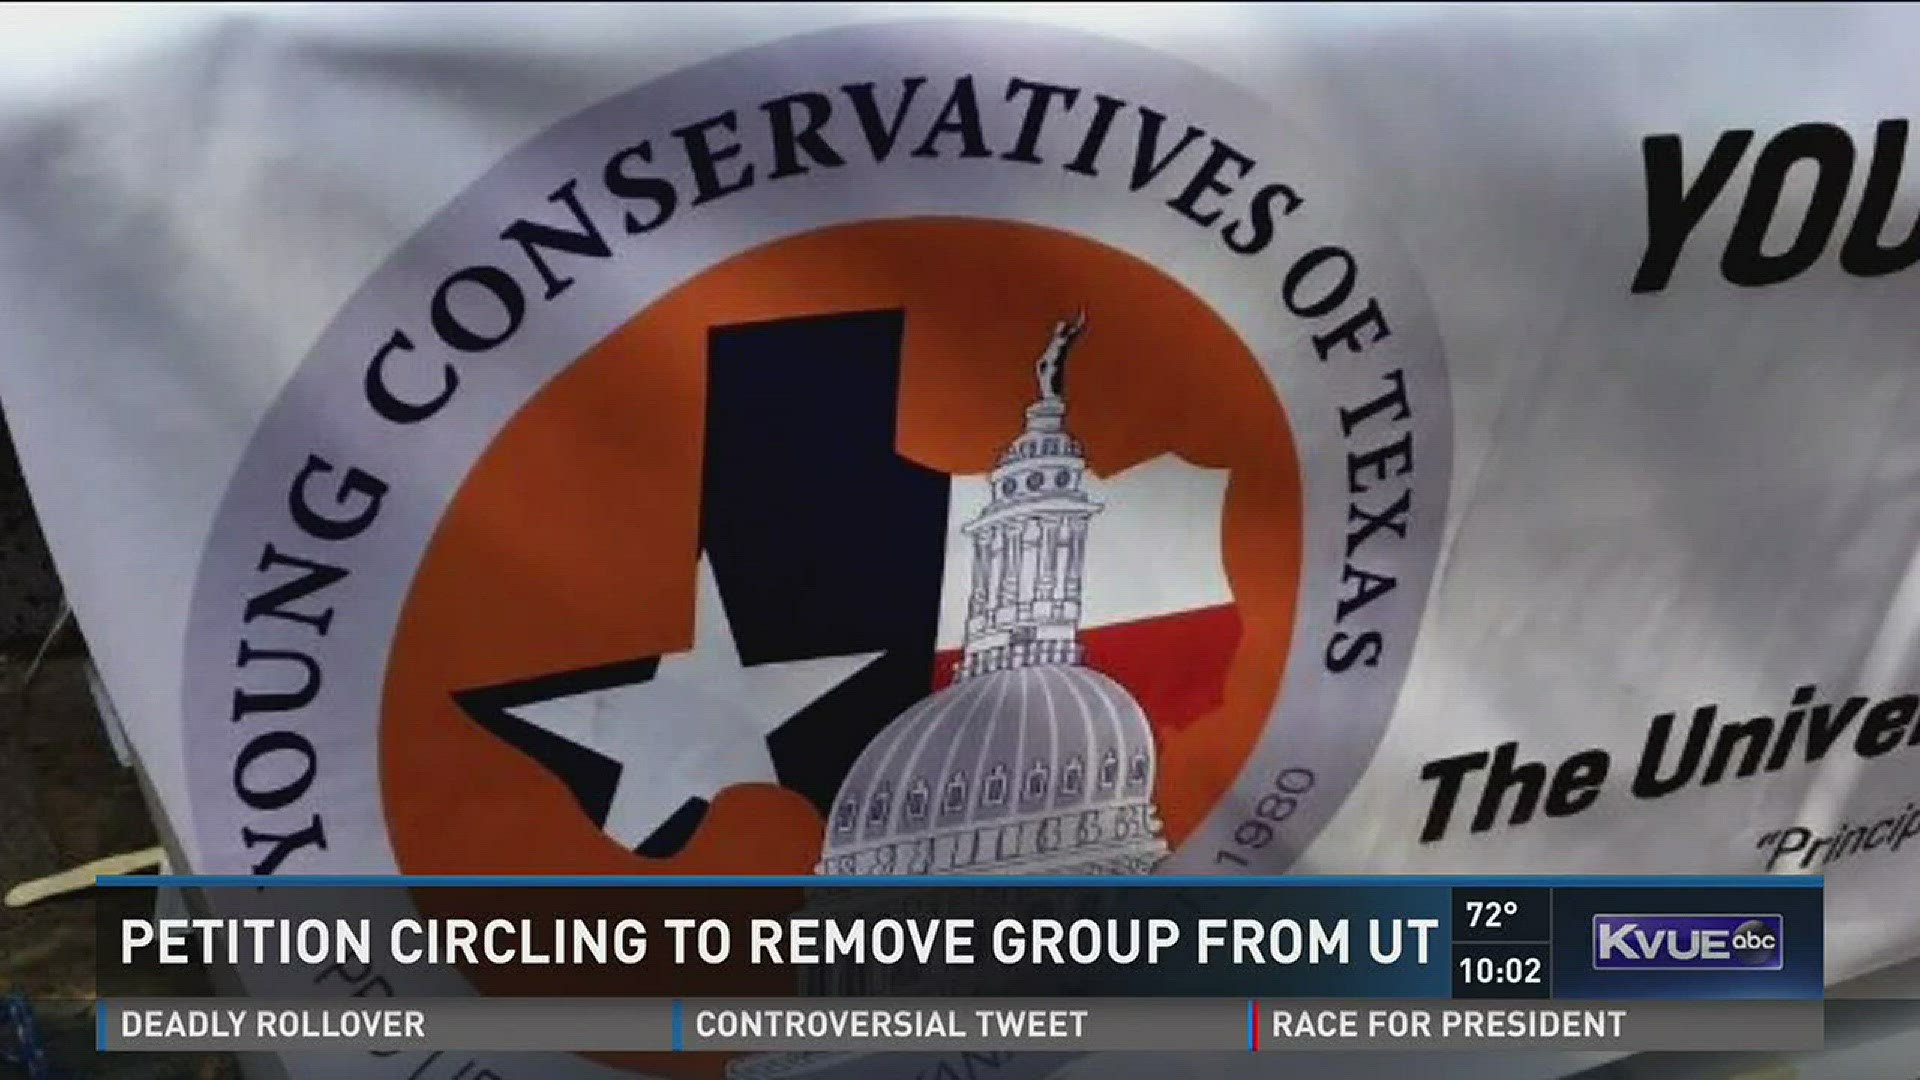 Petition circling to remove group from UT